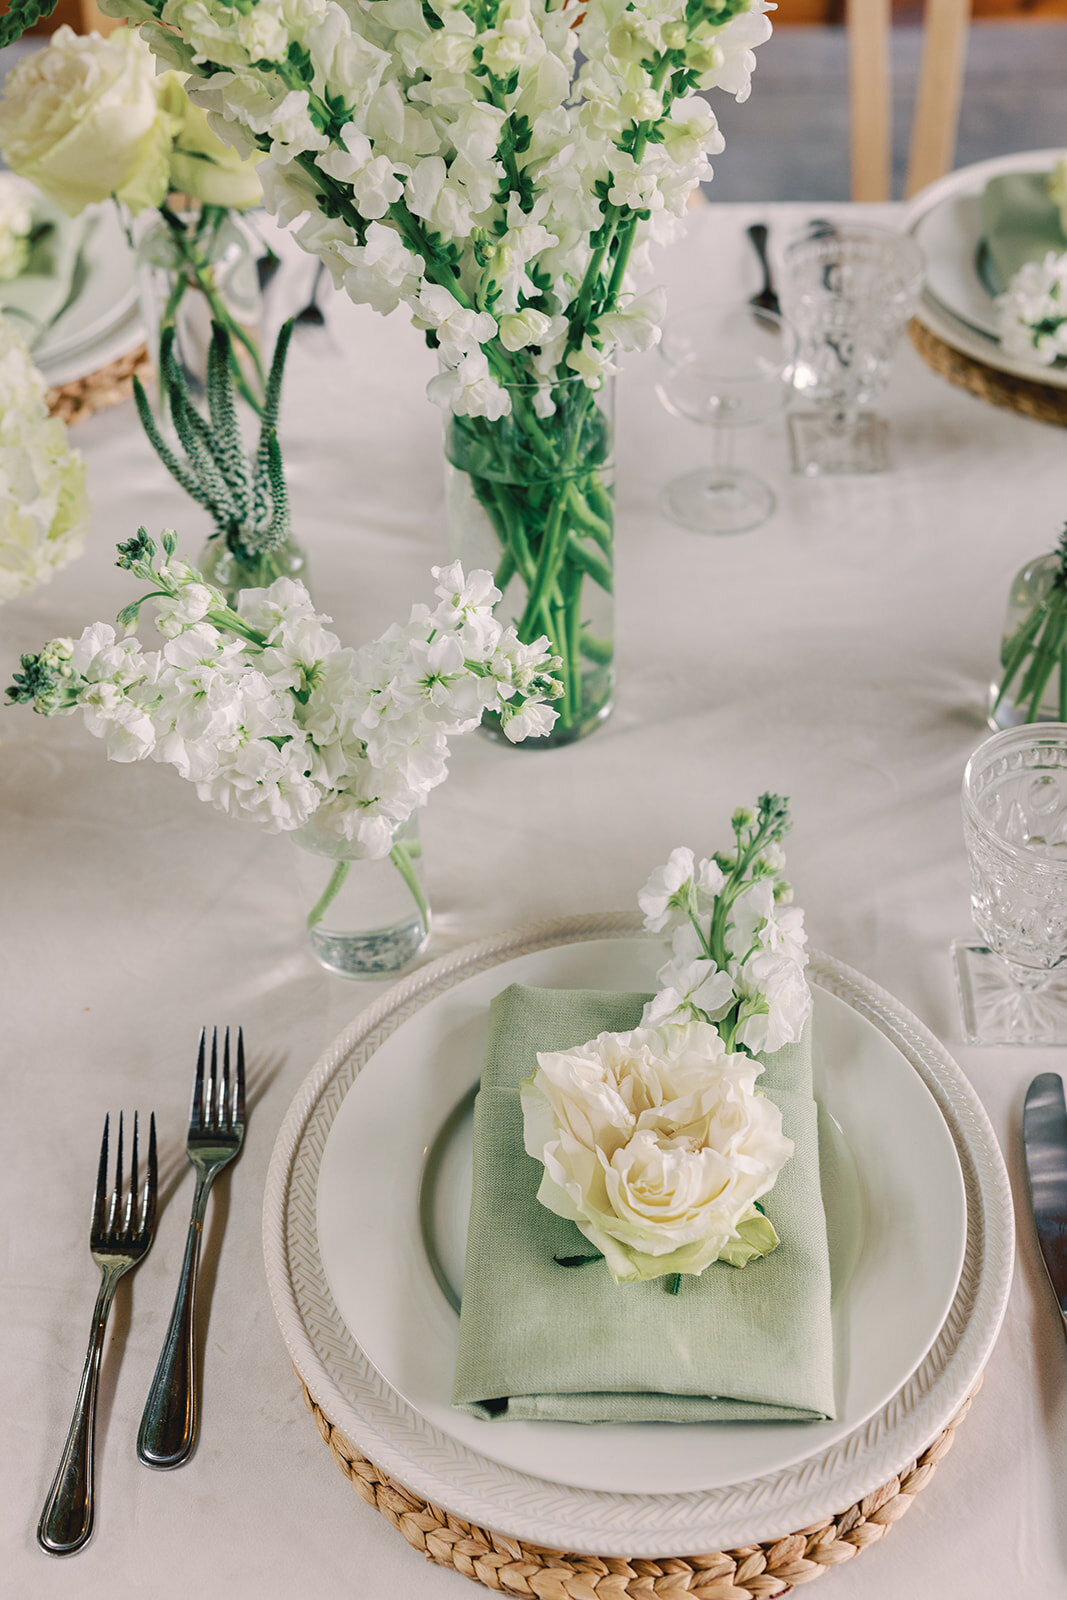 PLace setting with white plates, green napkins, and white and green florals